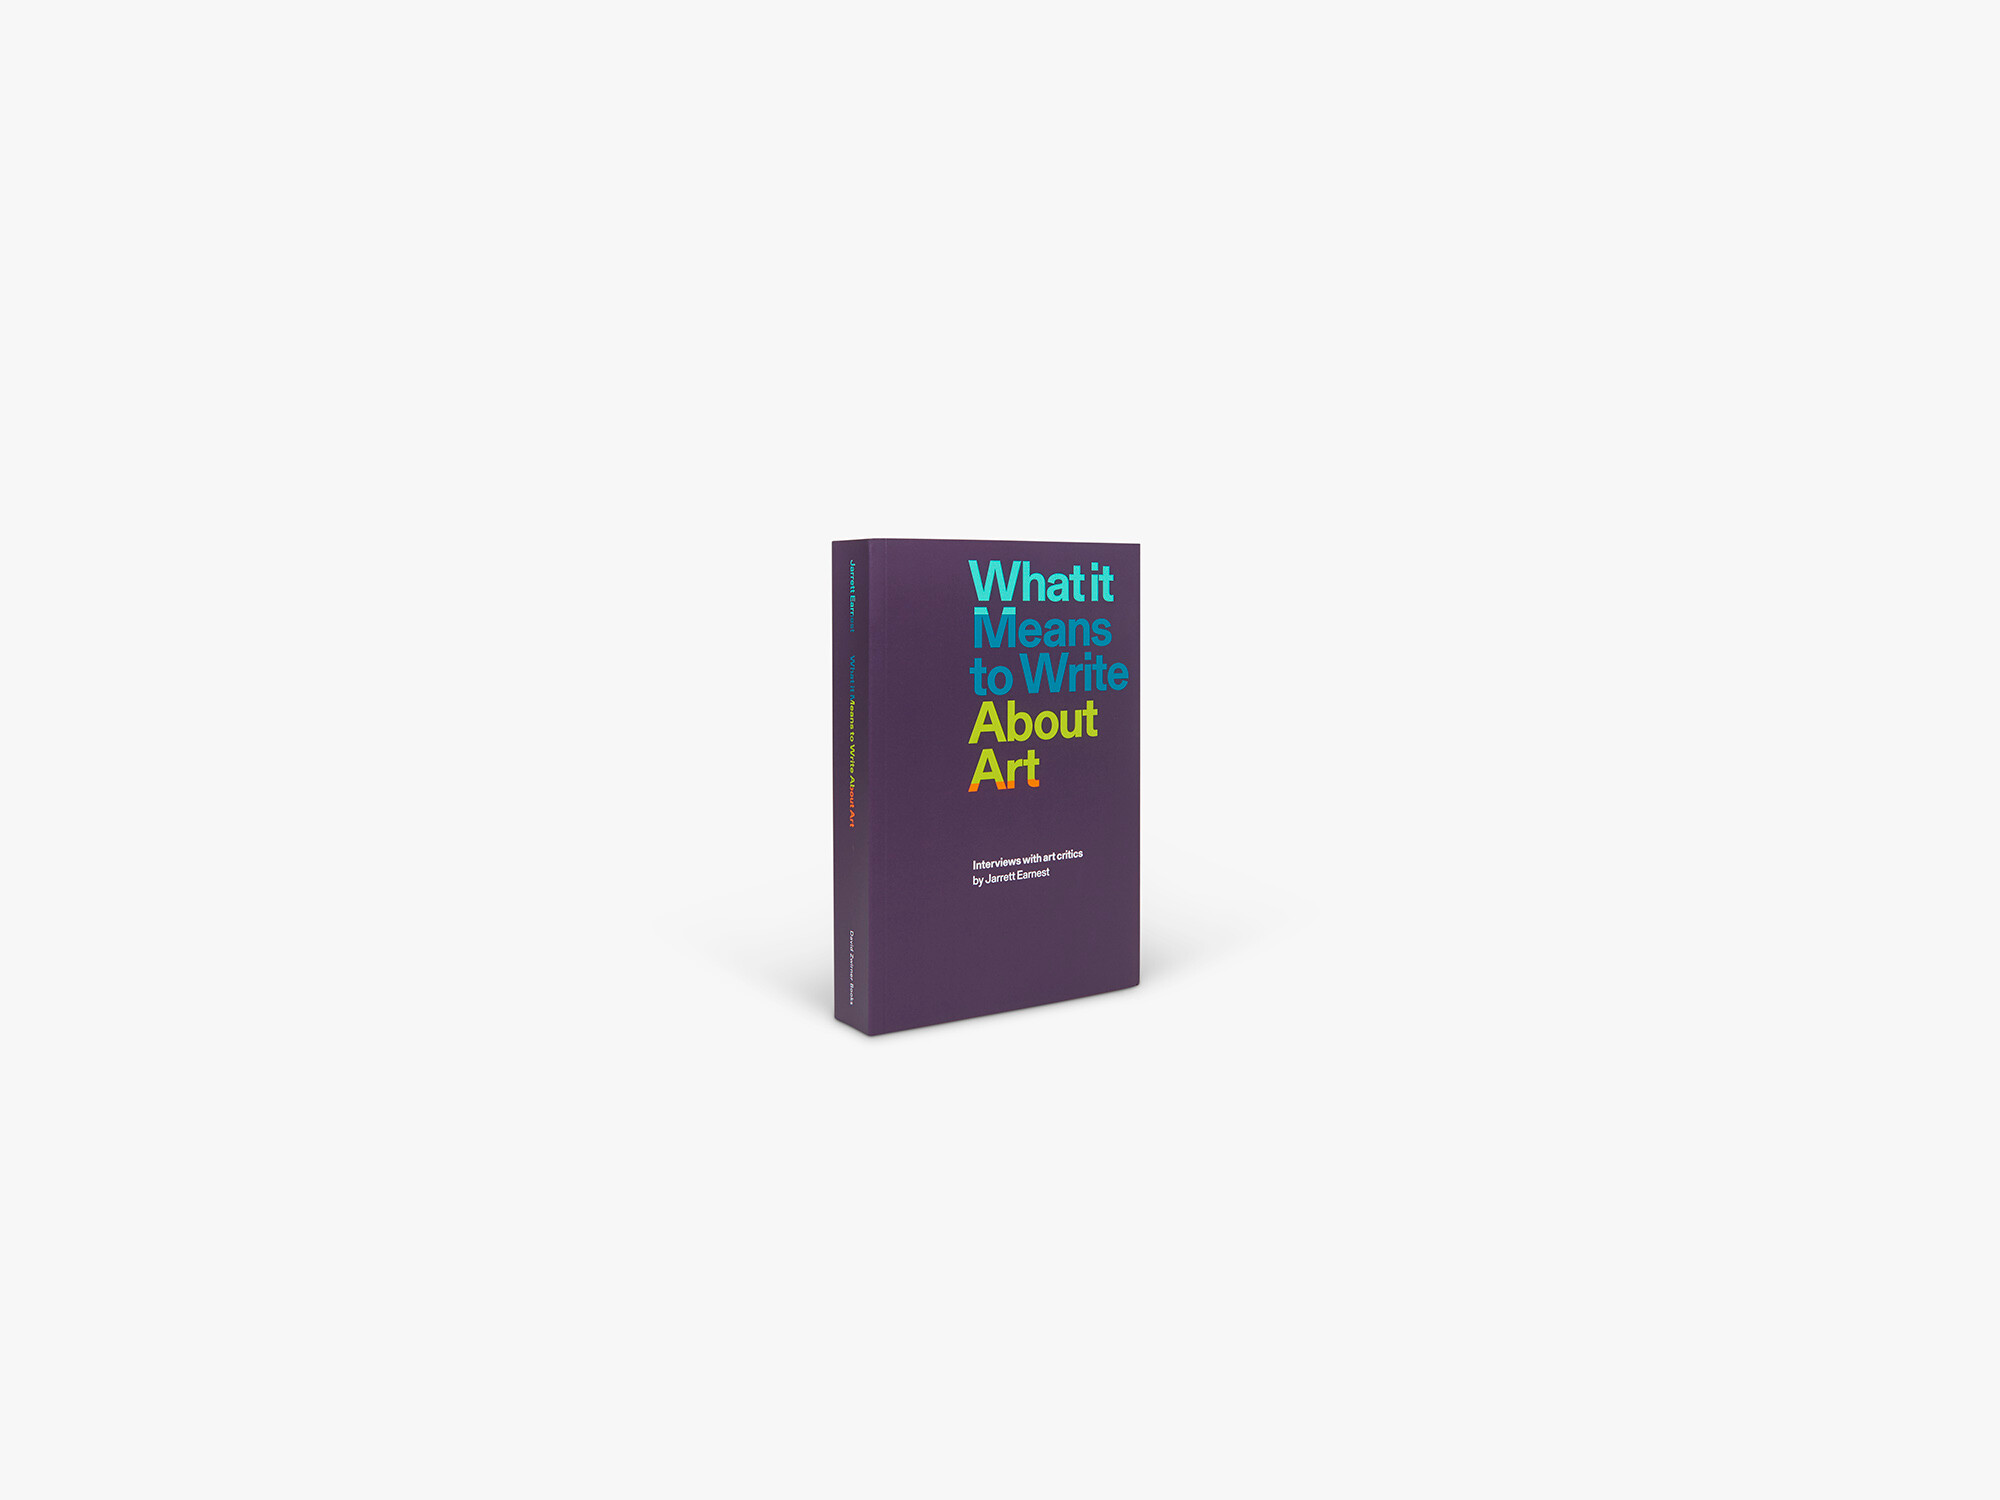 Cover of a book titled  What It Means To Write About Art: Interviews with art critics, published by David Zwirner Books in 2018.